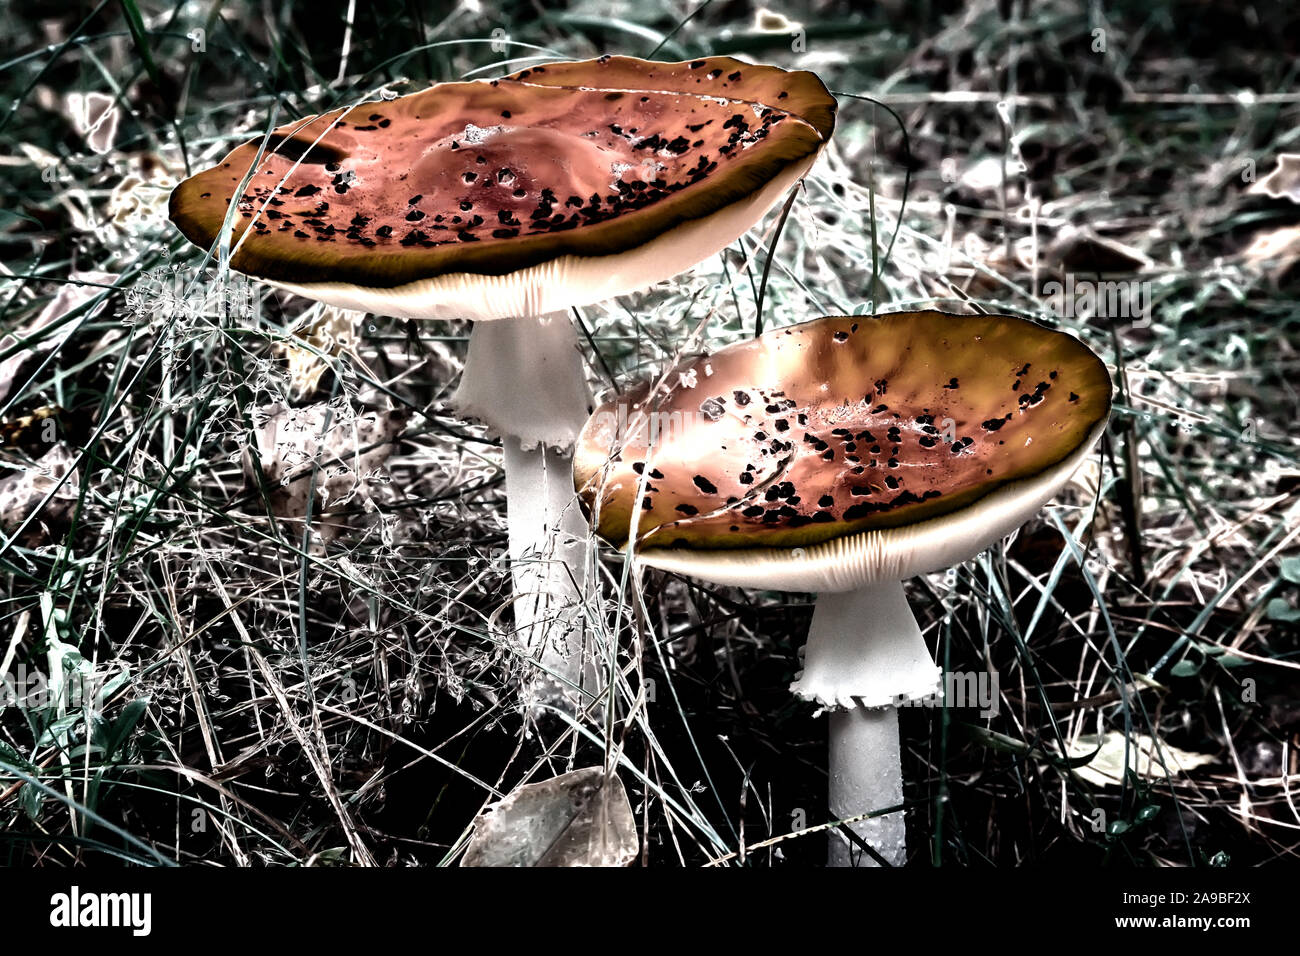 Two poisonous mushroom fly agaric in a forest clearing. Abstract image. Stock Photo